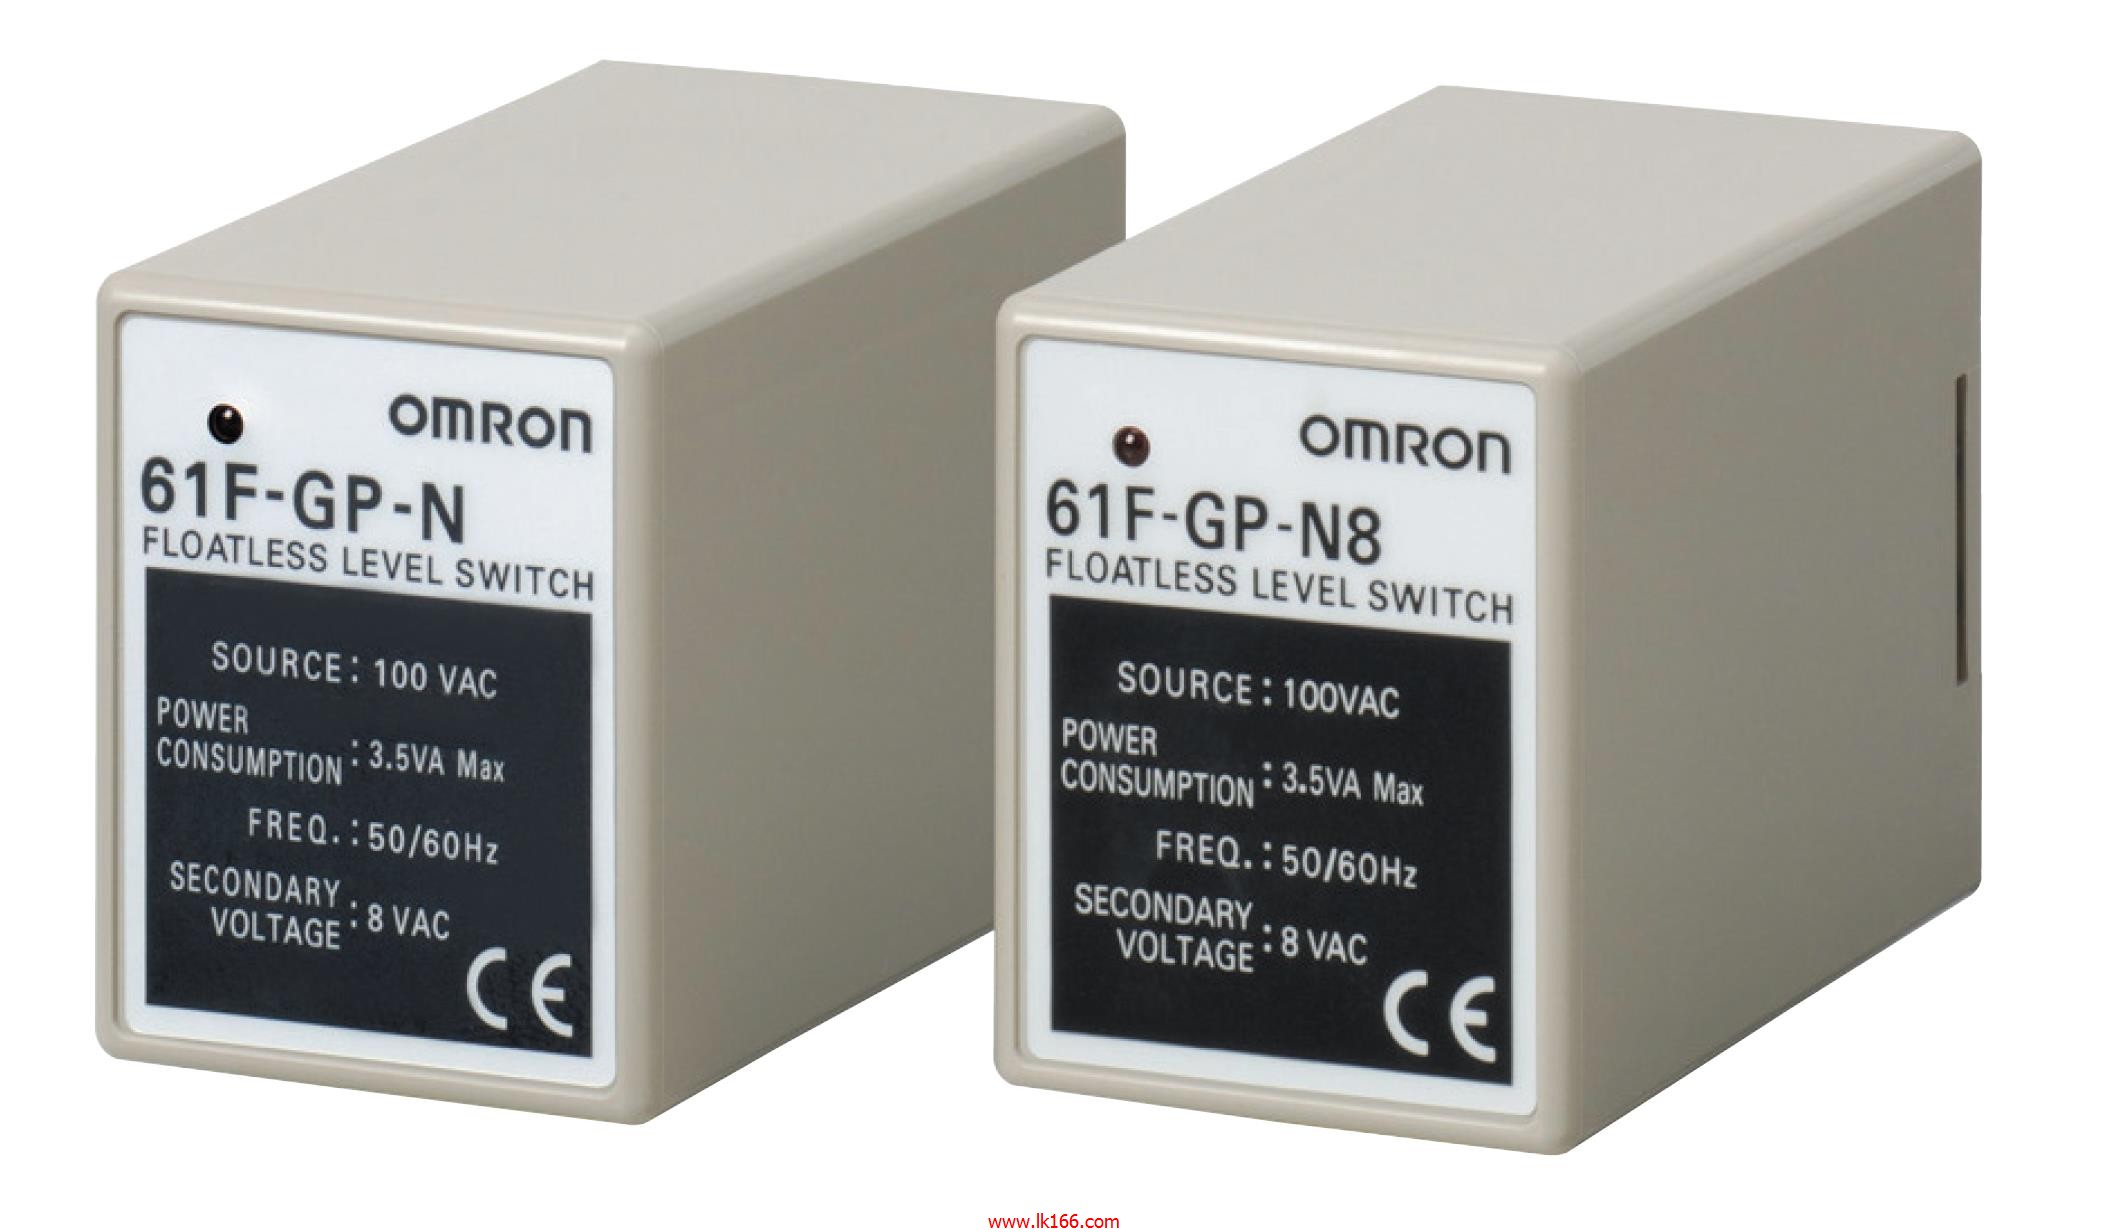 OMRON Floatless Level Switch (Compact, Plug-in Type) 61F-GP-NL 4KM